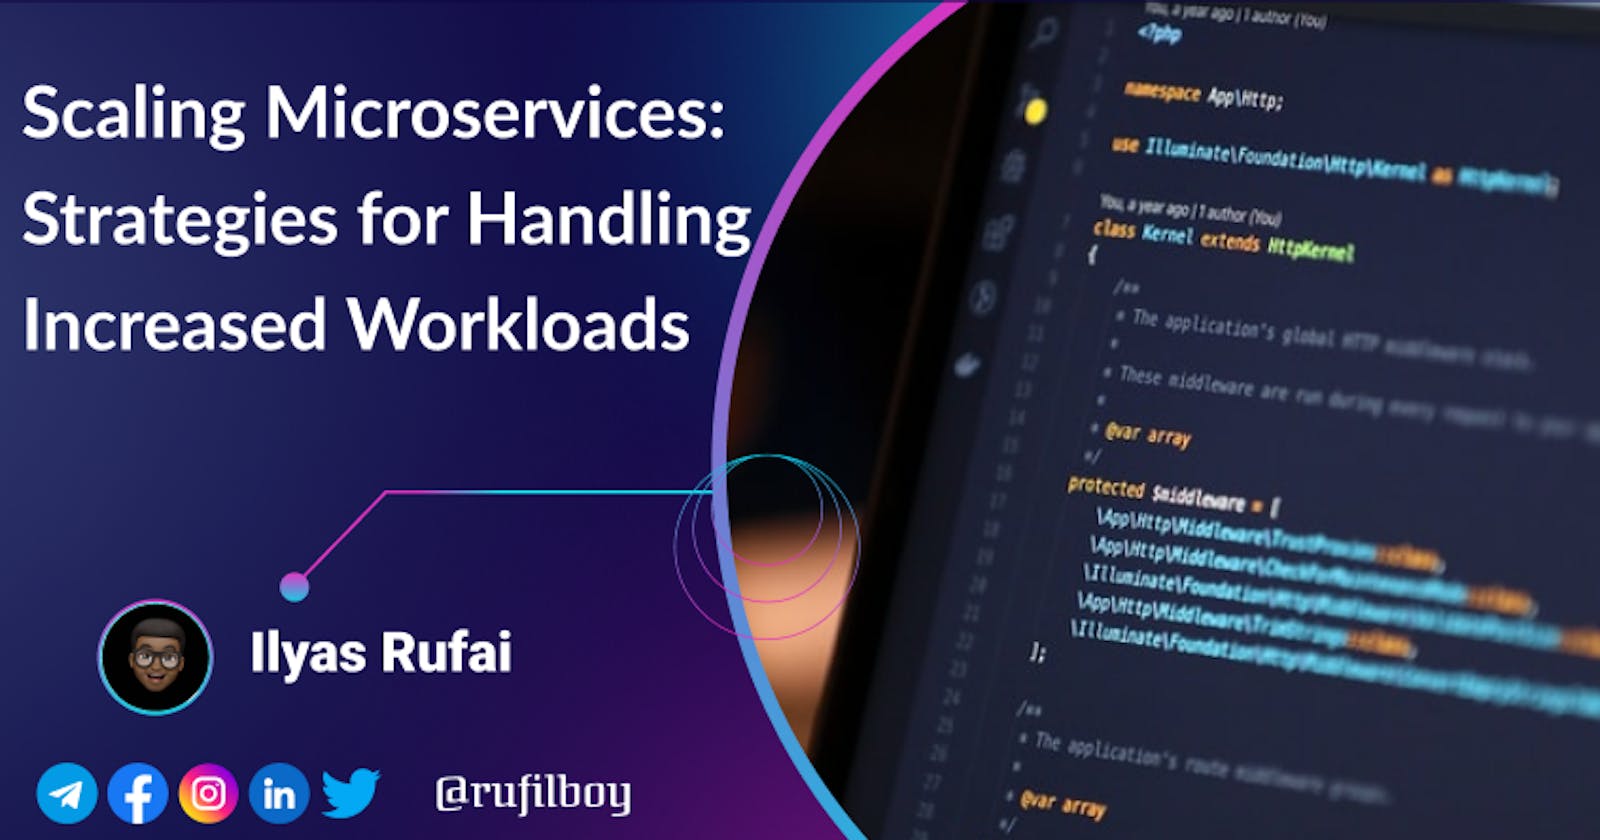 Day 94 -Scaling Microservices: Strategies for Handling Increased Workloads